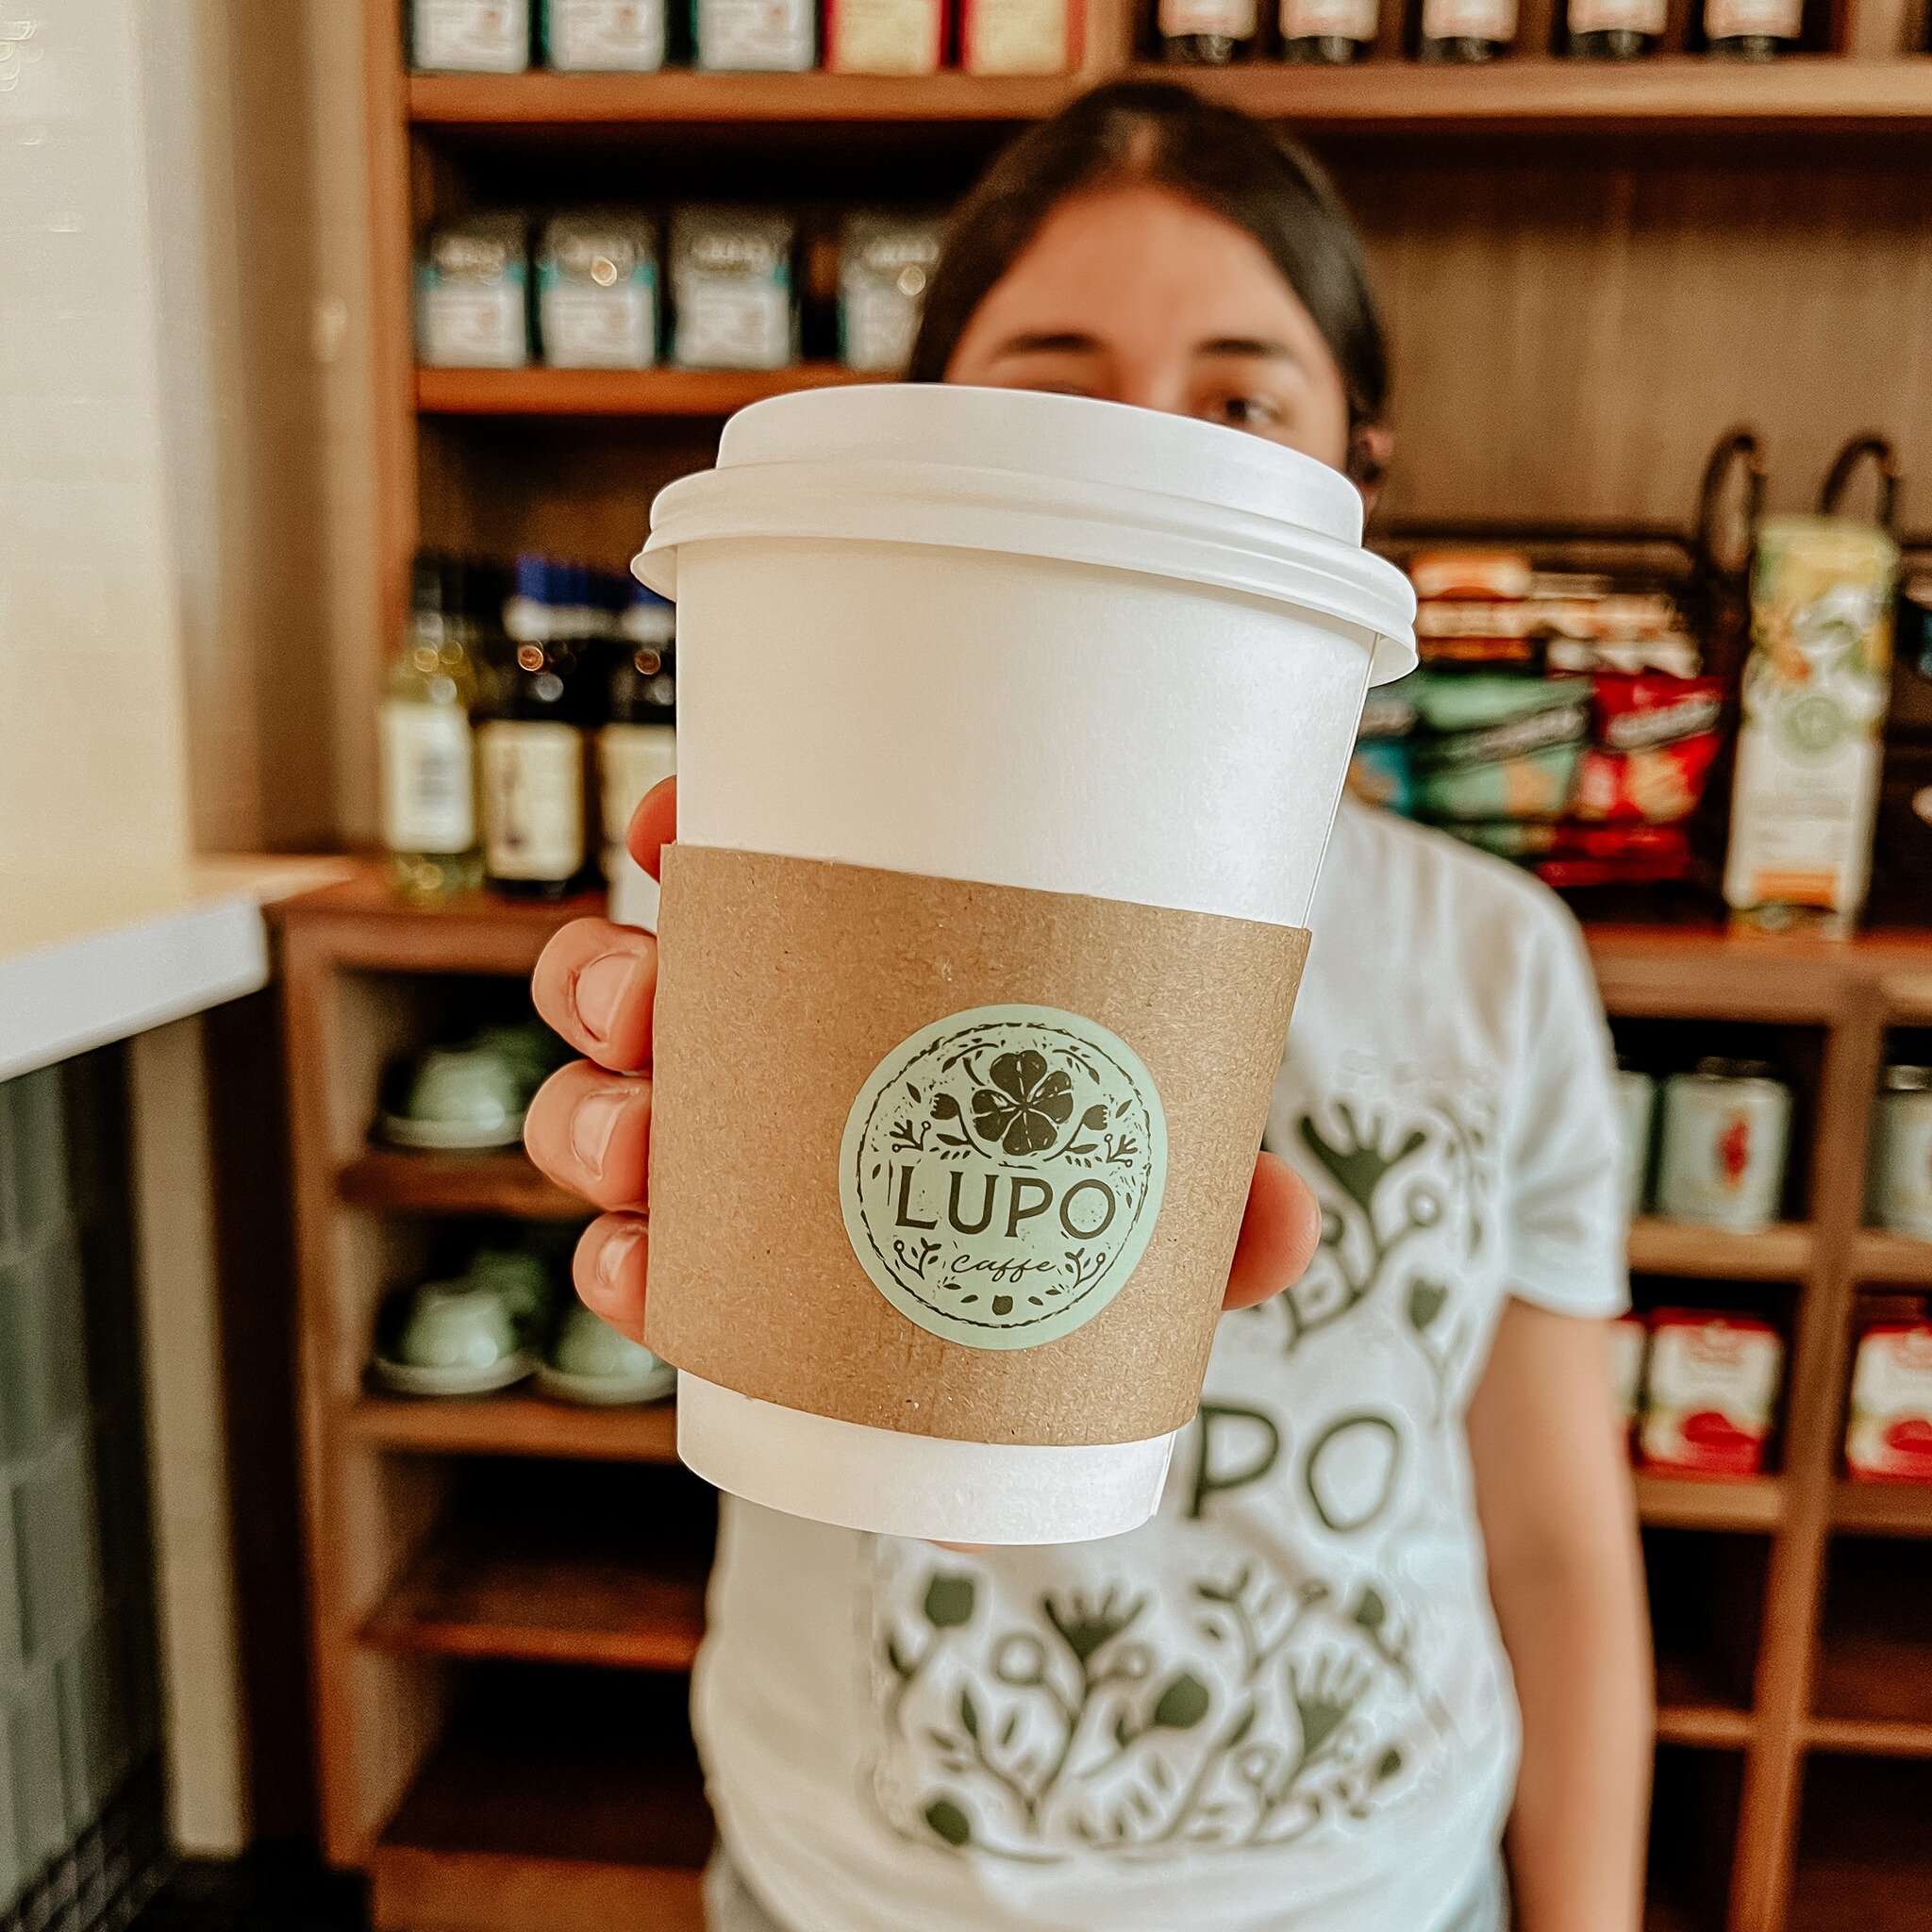 In need of that midday pick me up? We got you covered.